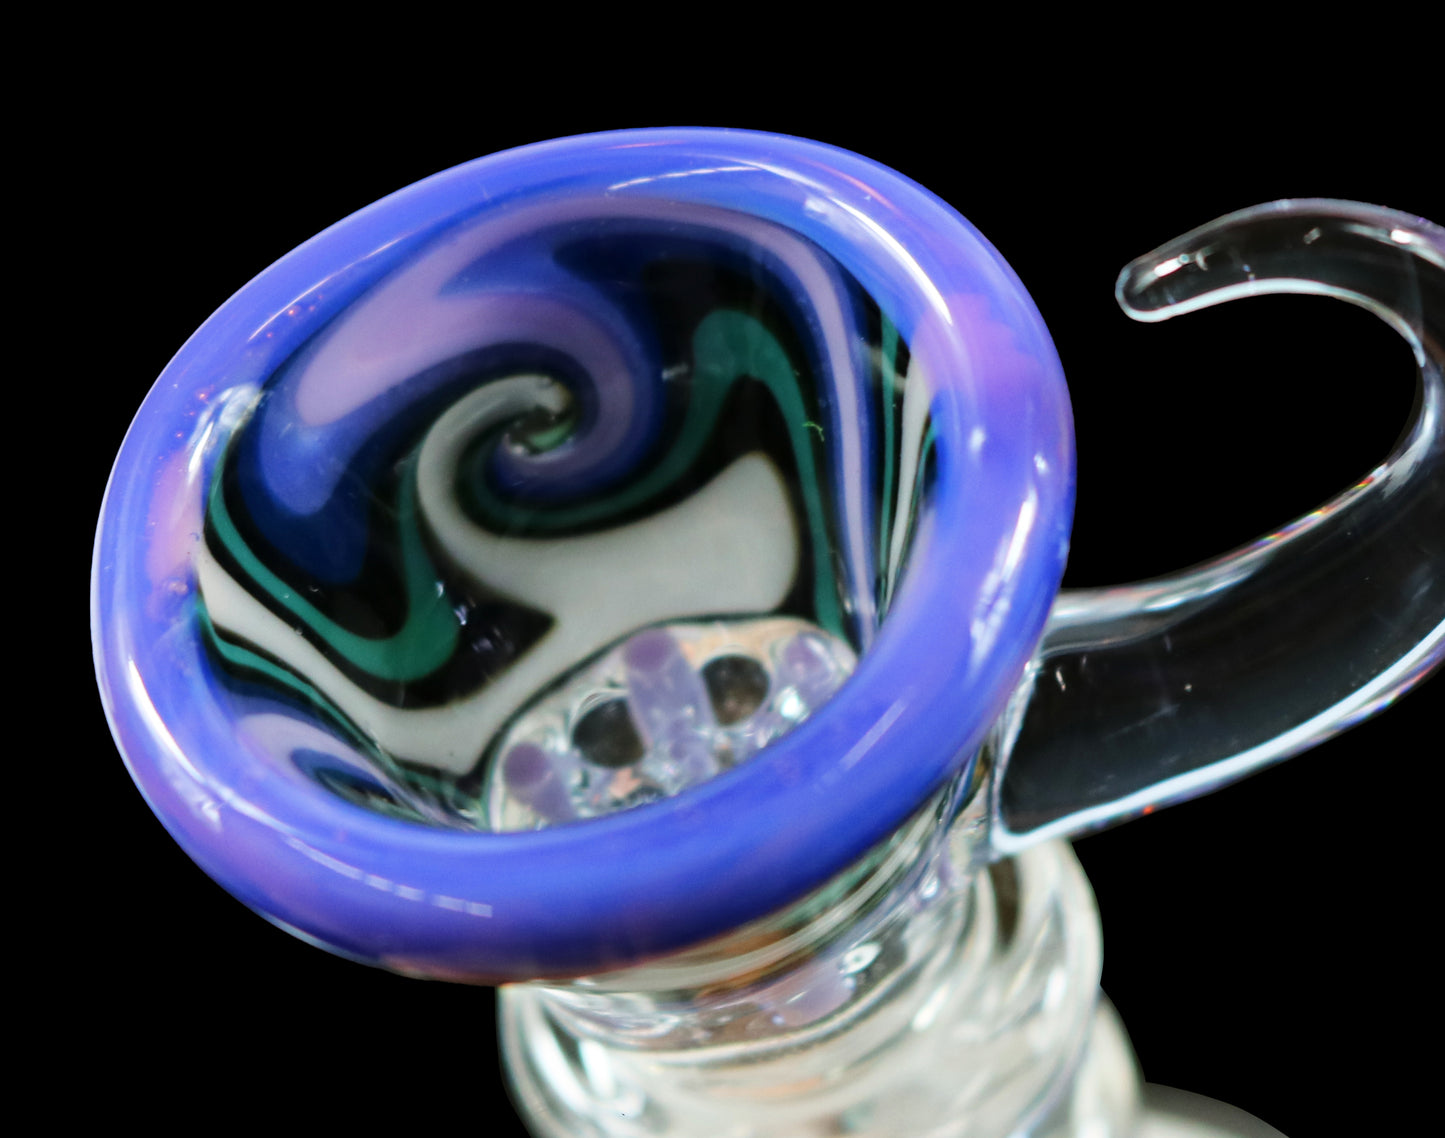 14mm Martini Slide with built in screen from Glass by Slick- Transparent Purple/Teal/White/Black/Dark Blue